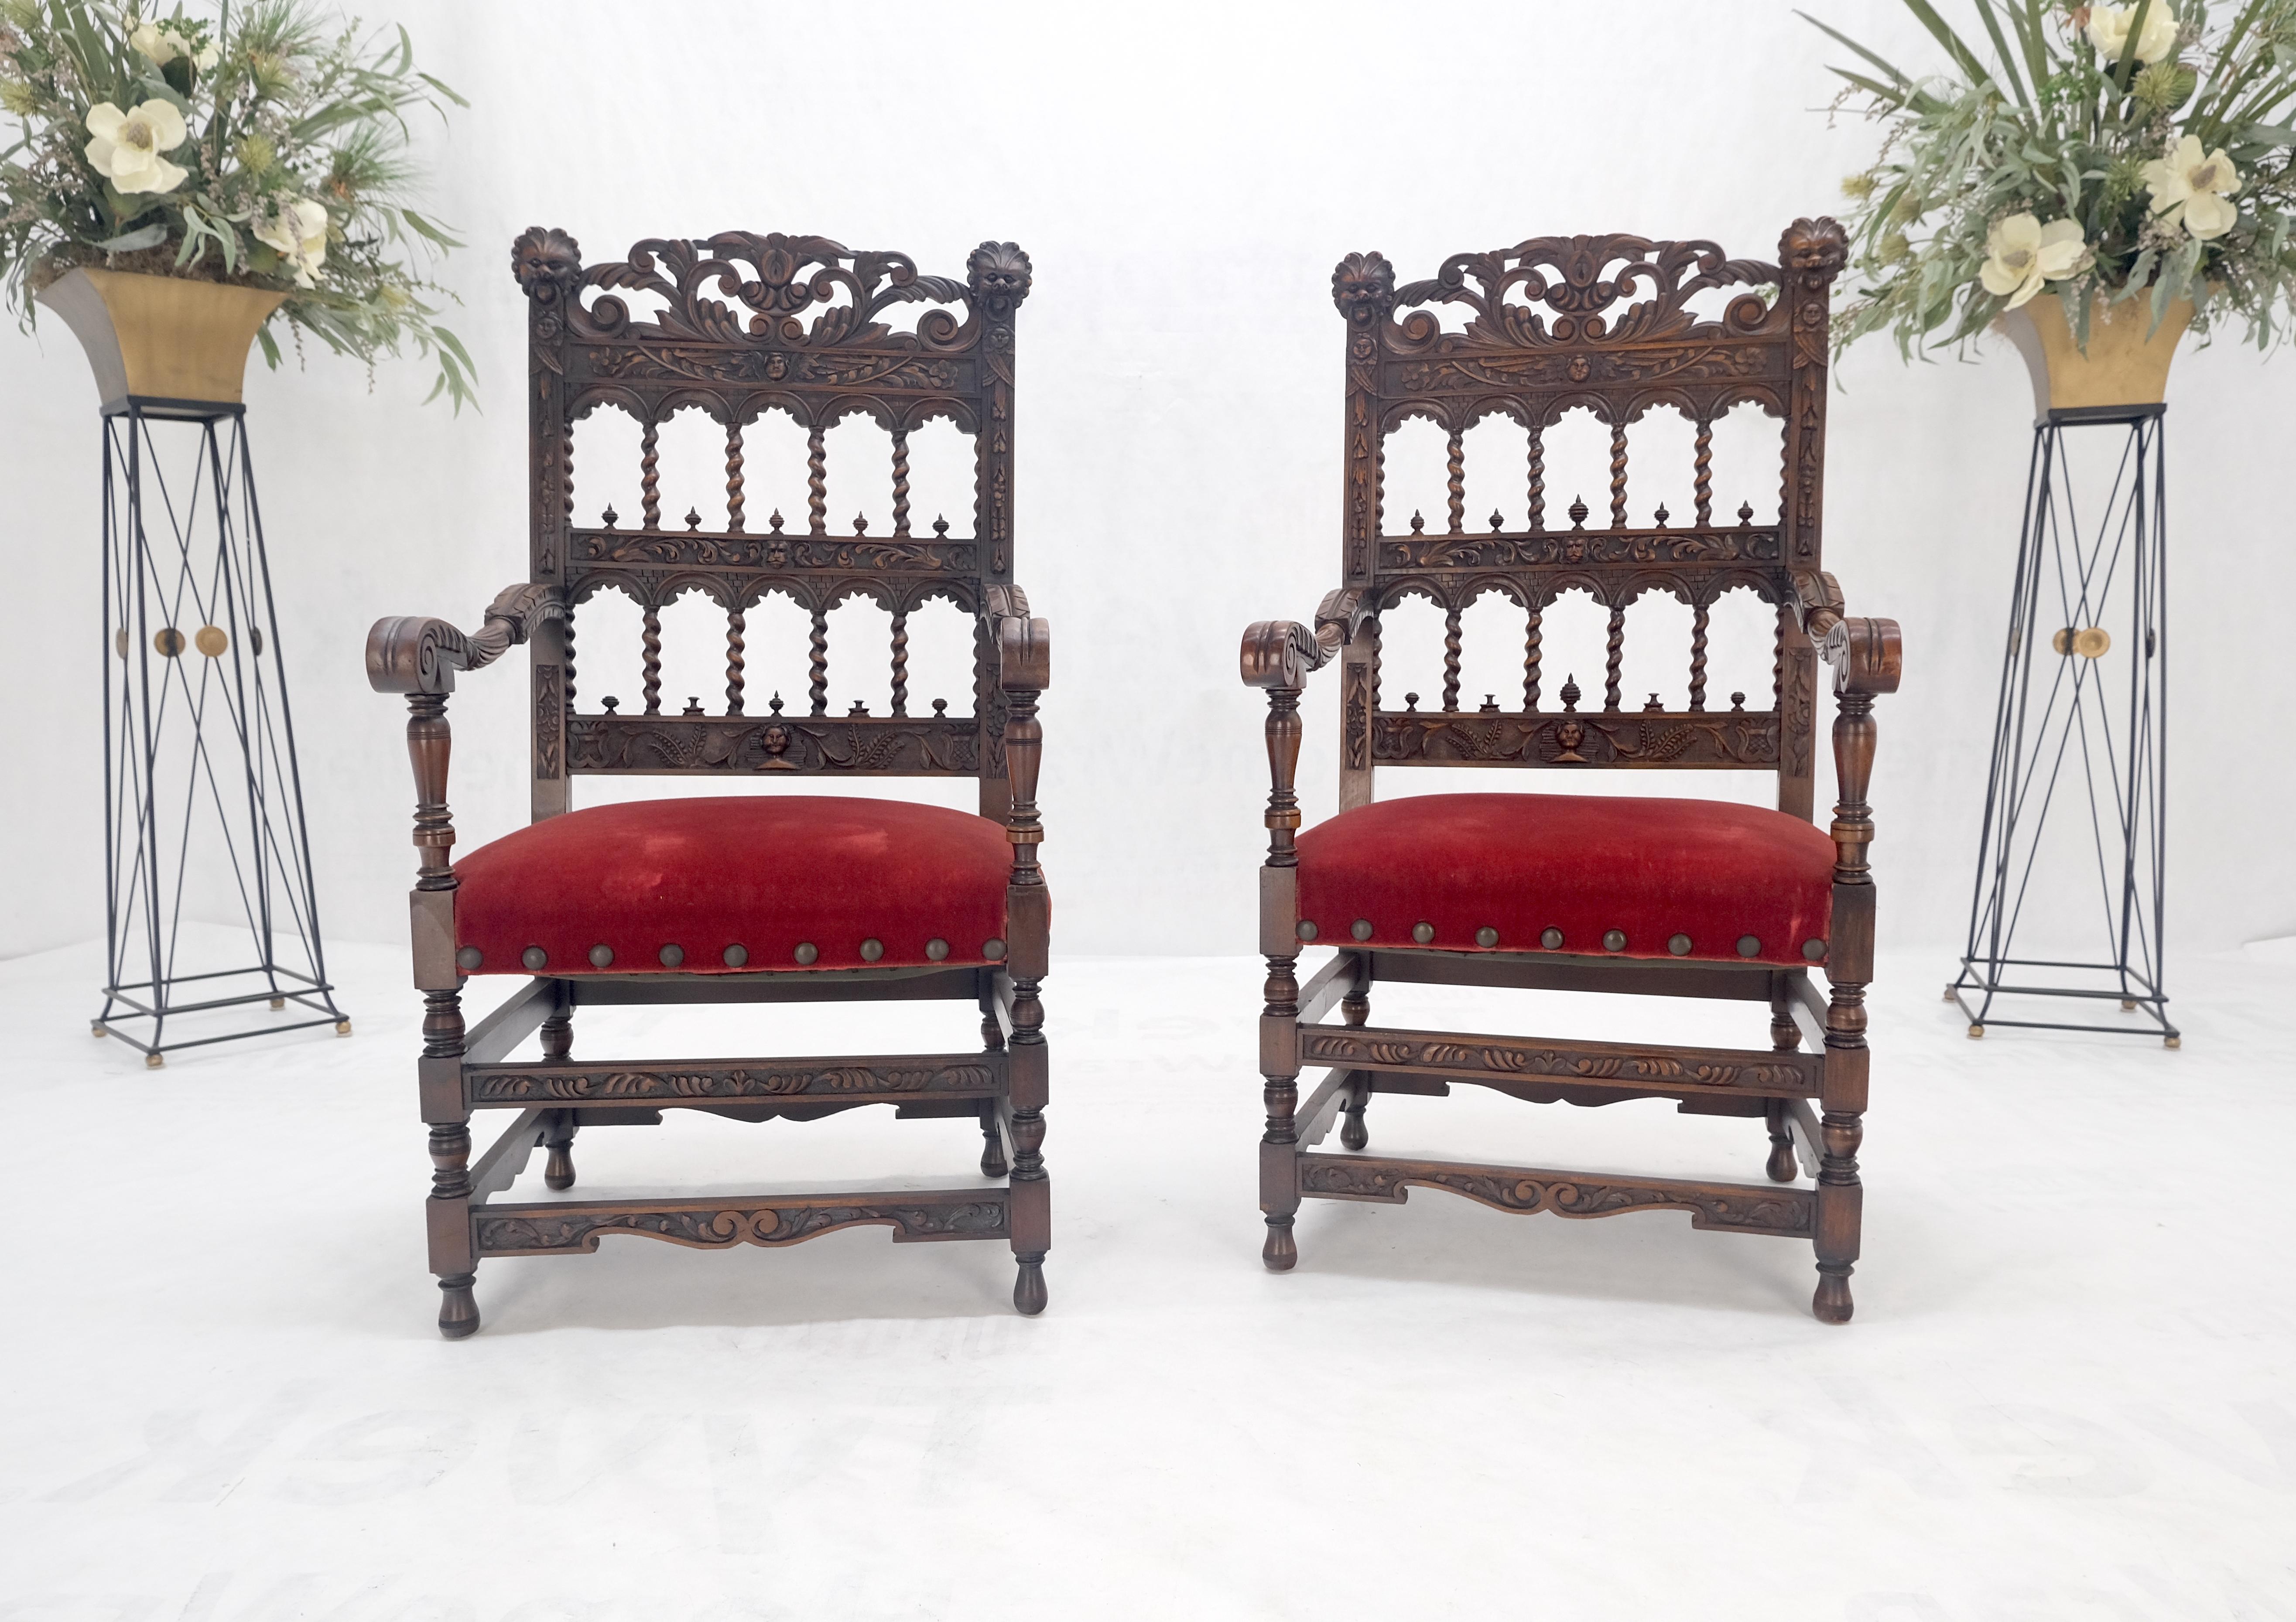 20th Century Fine Carved North Winds Faces Heavy Oak Arm Chairs Twisted Spindles c1900s MINT For Sale